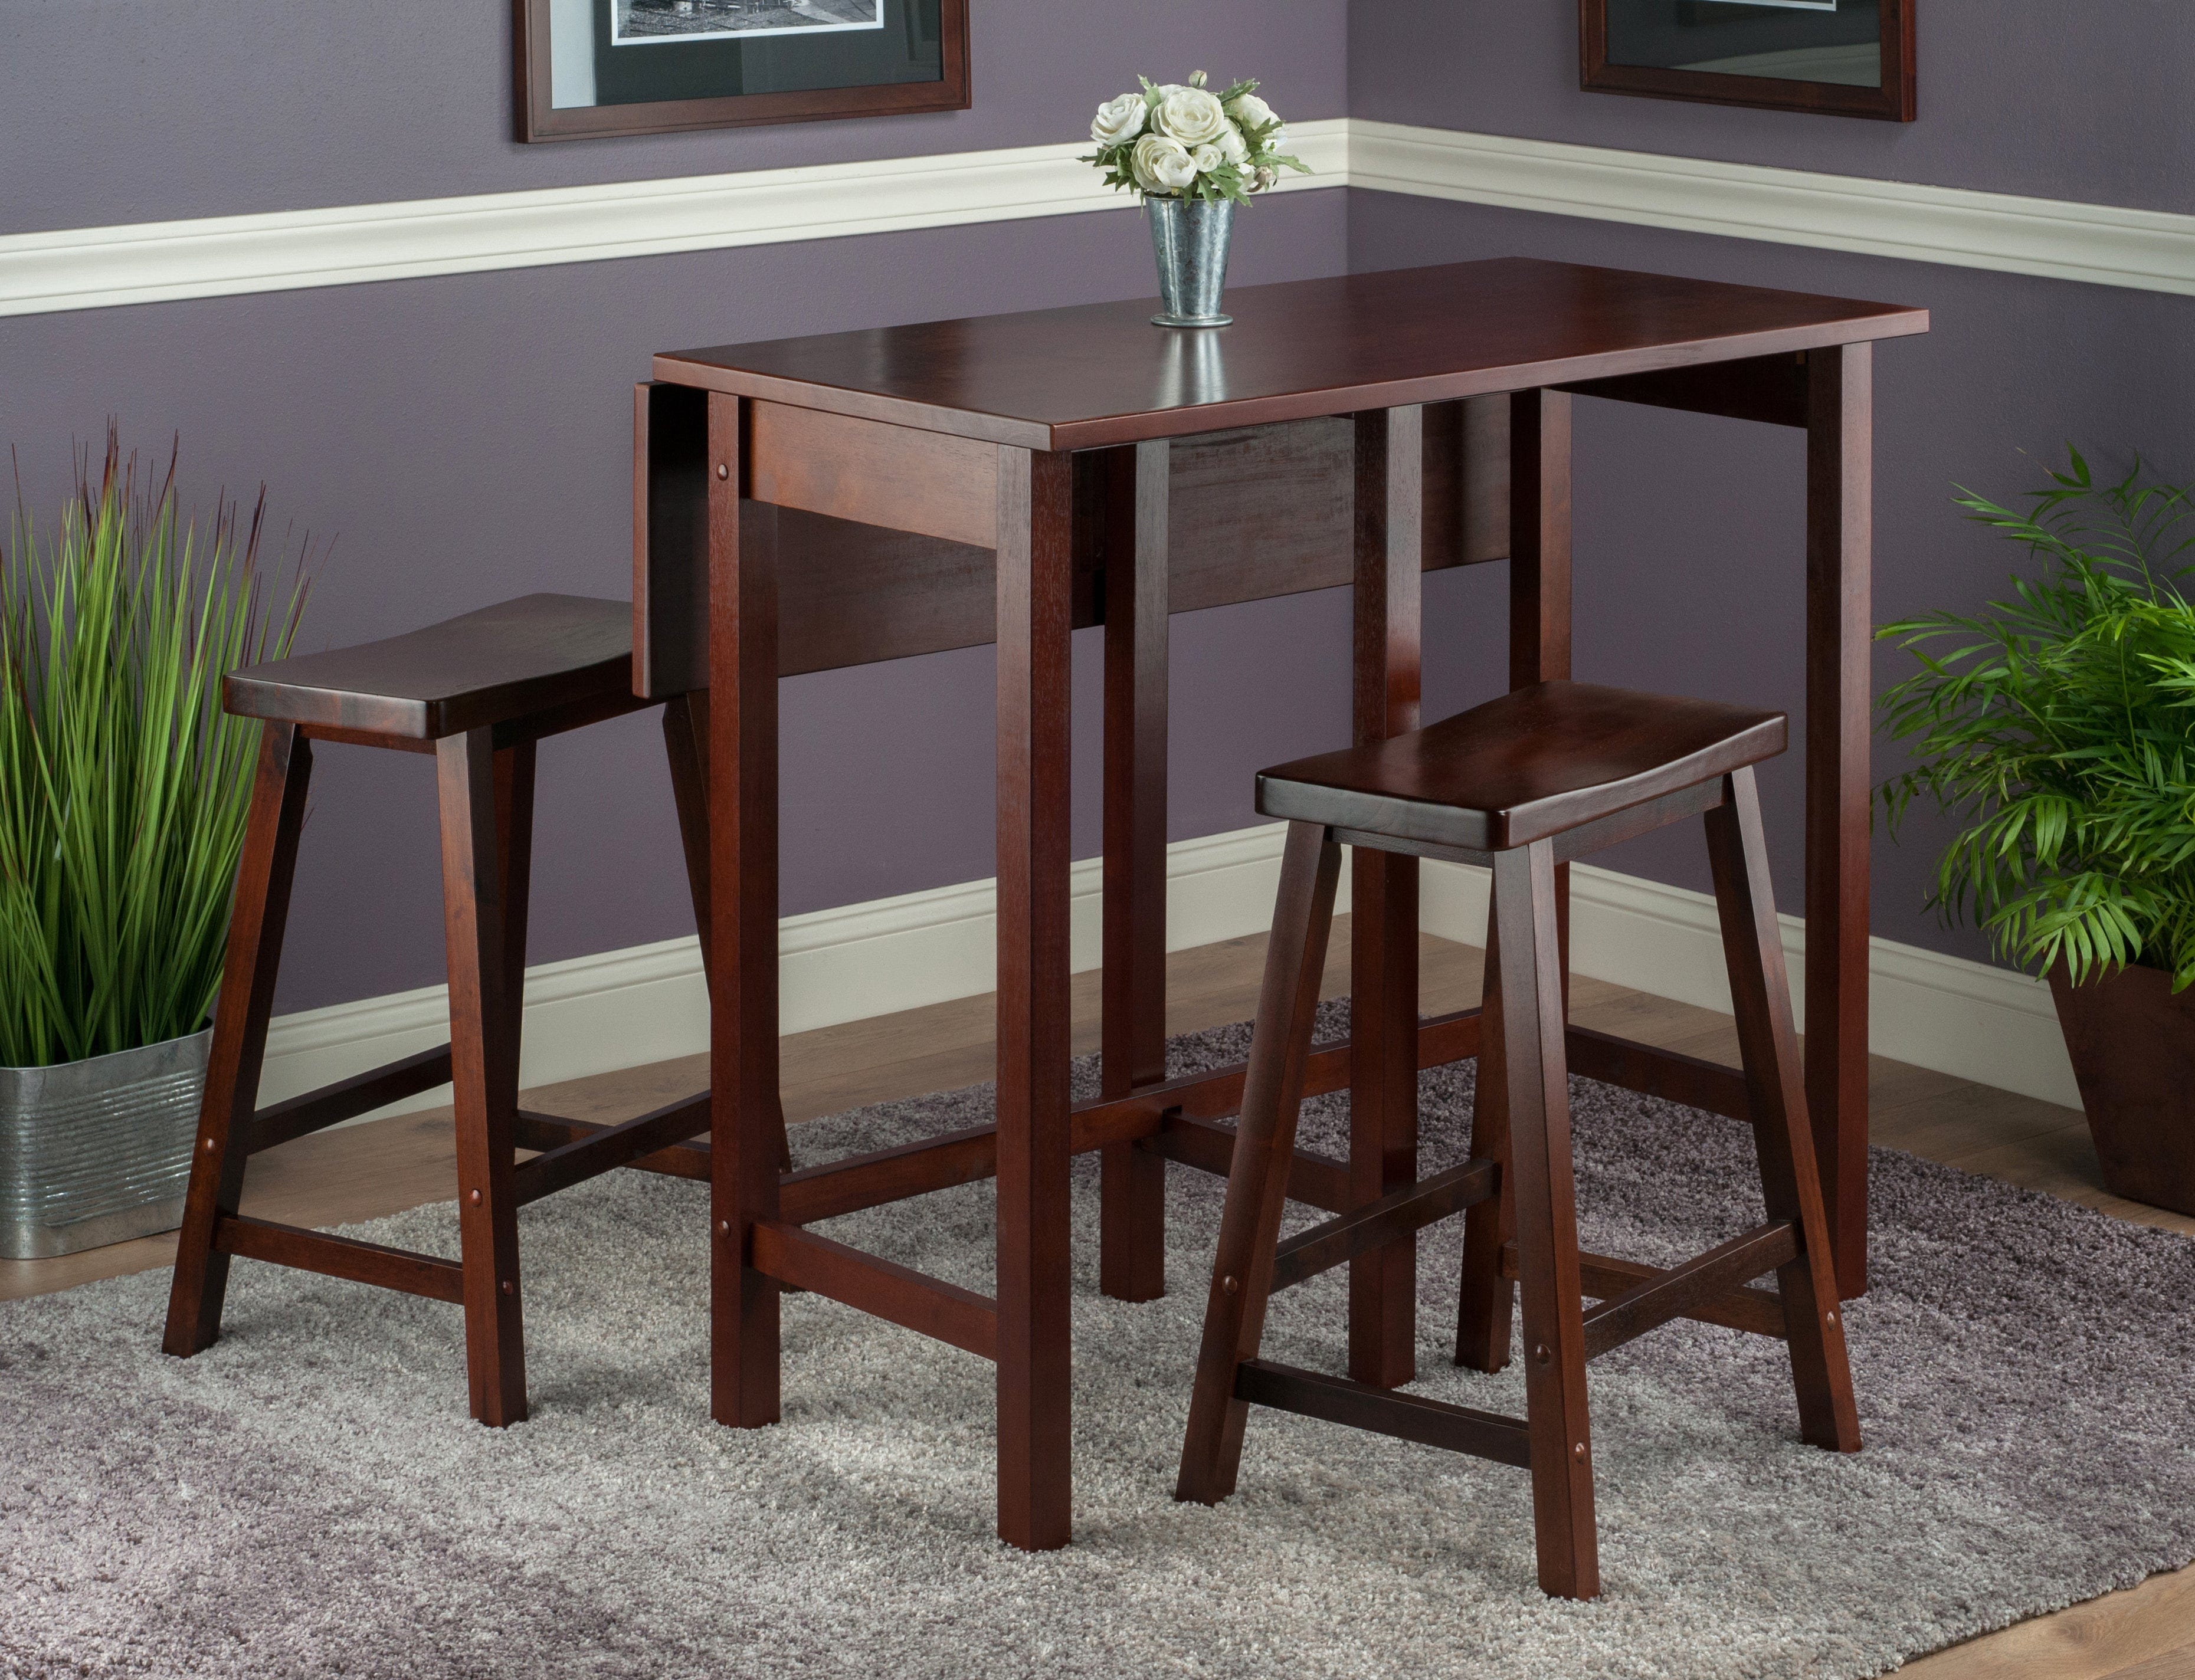 Lynnwood 3-Pc Drop Leaf Table with Saddle Seat Counter Stools, Walnut